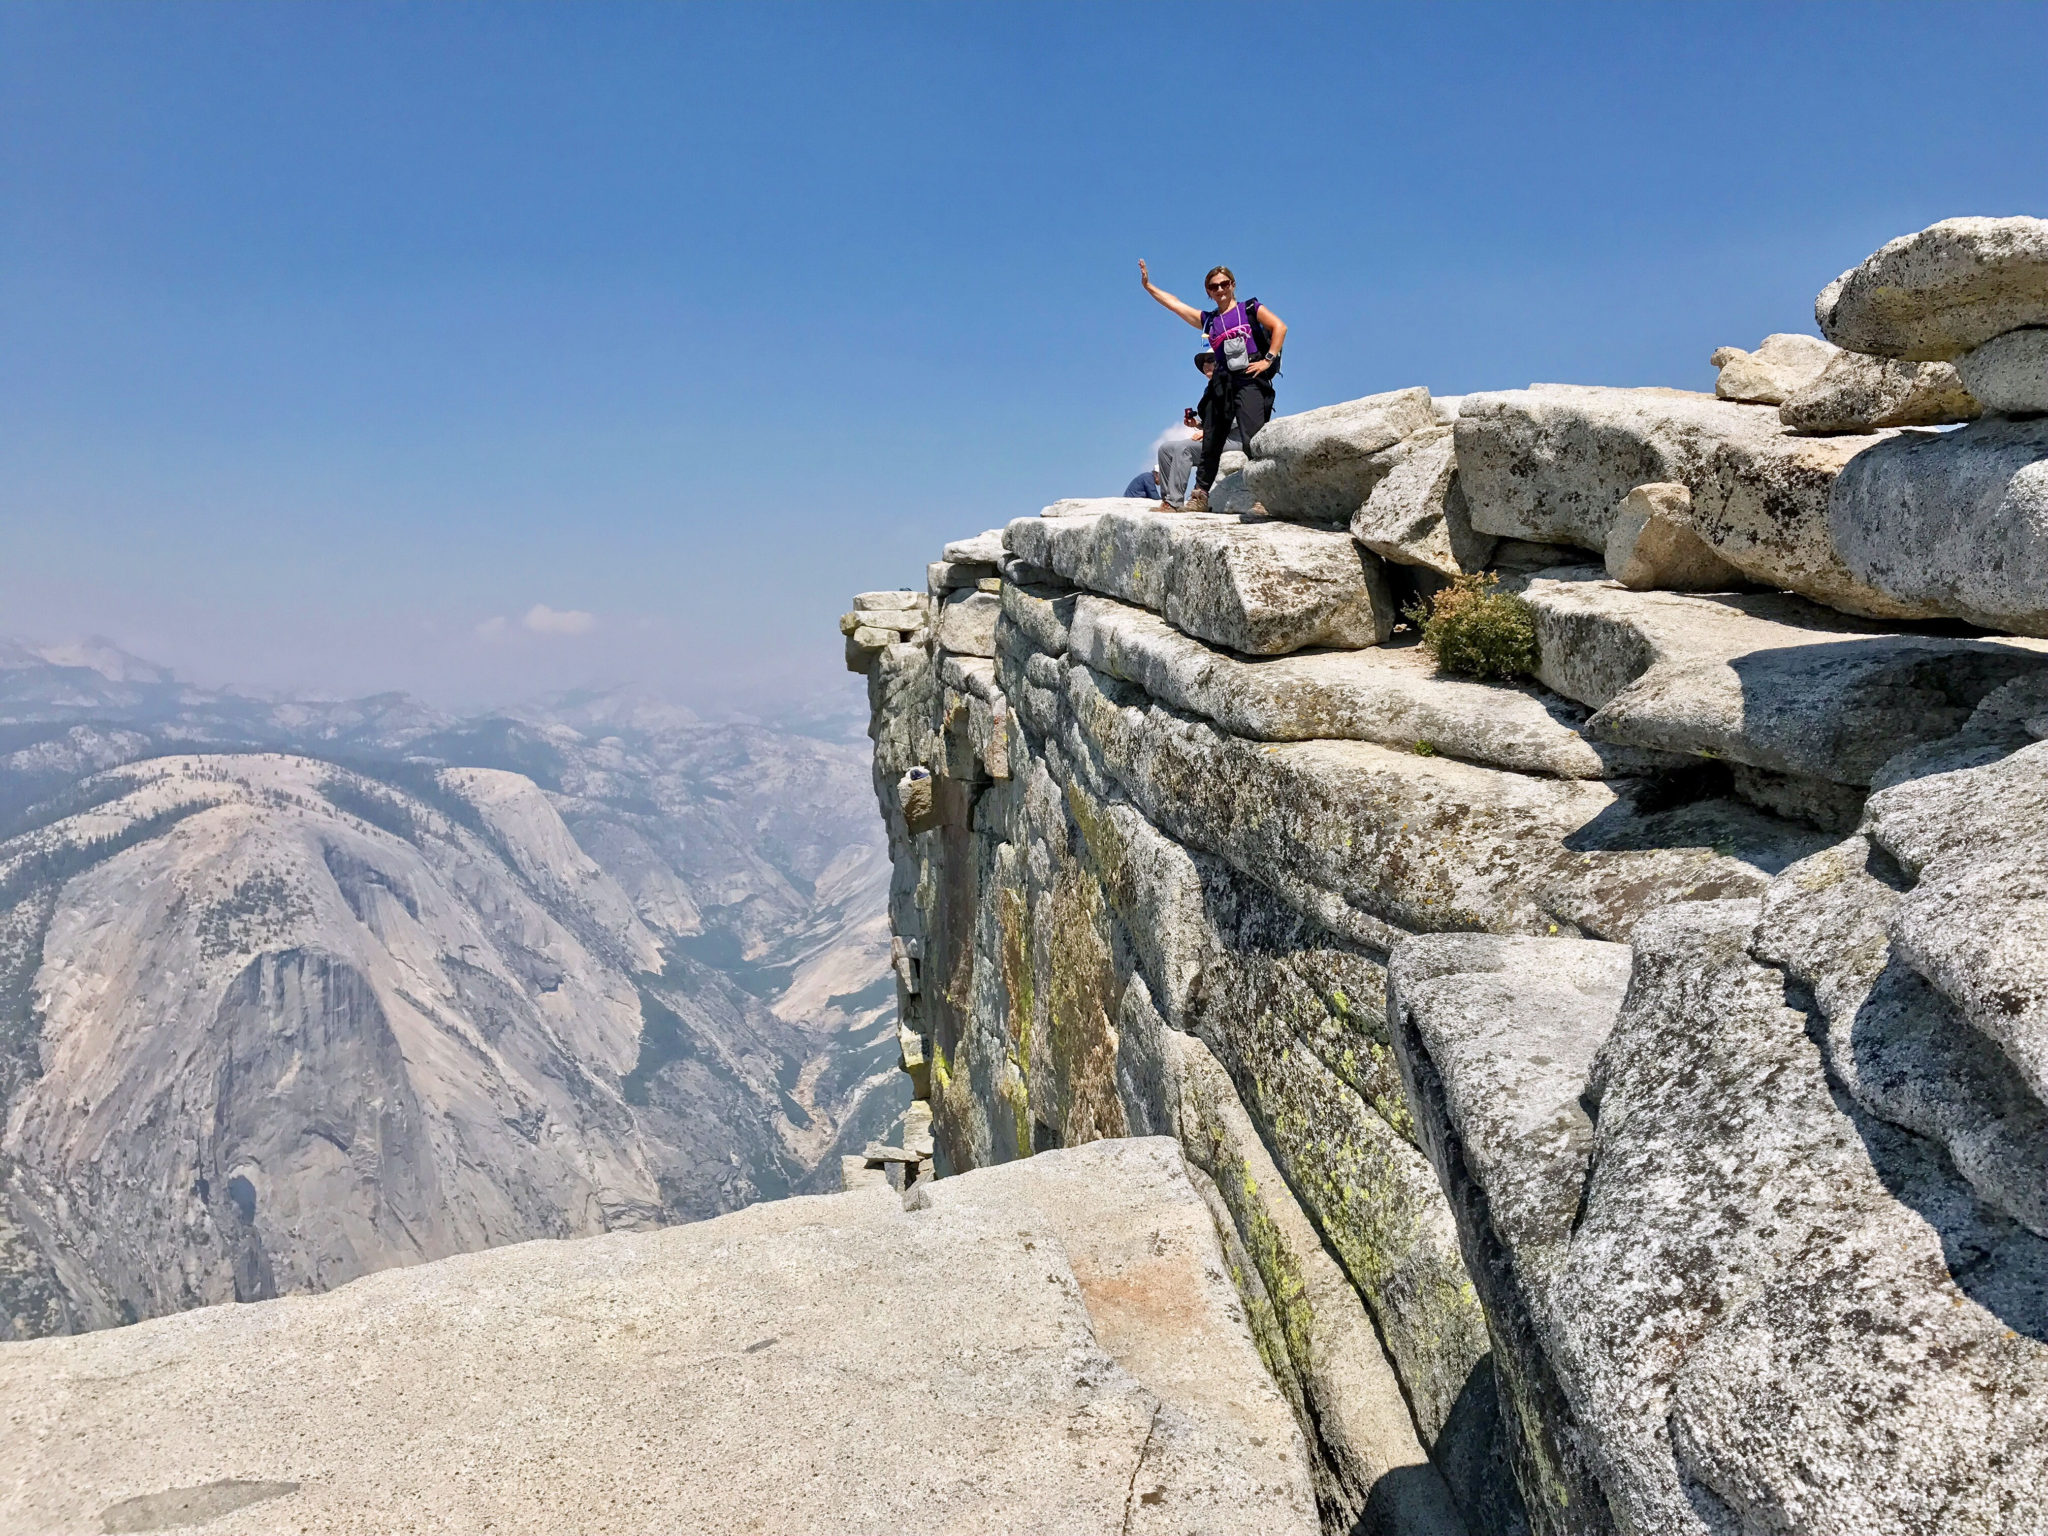 On top of Half Dome